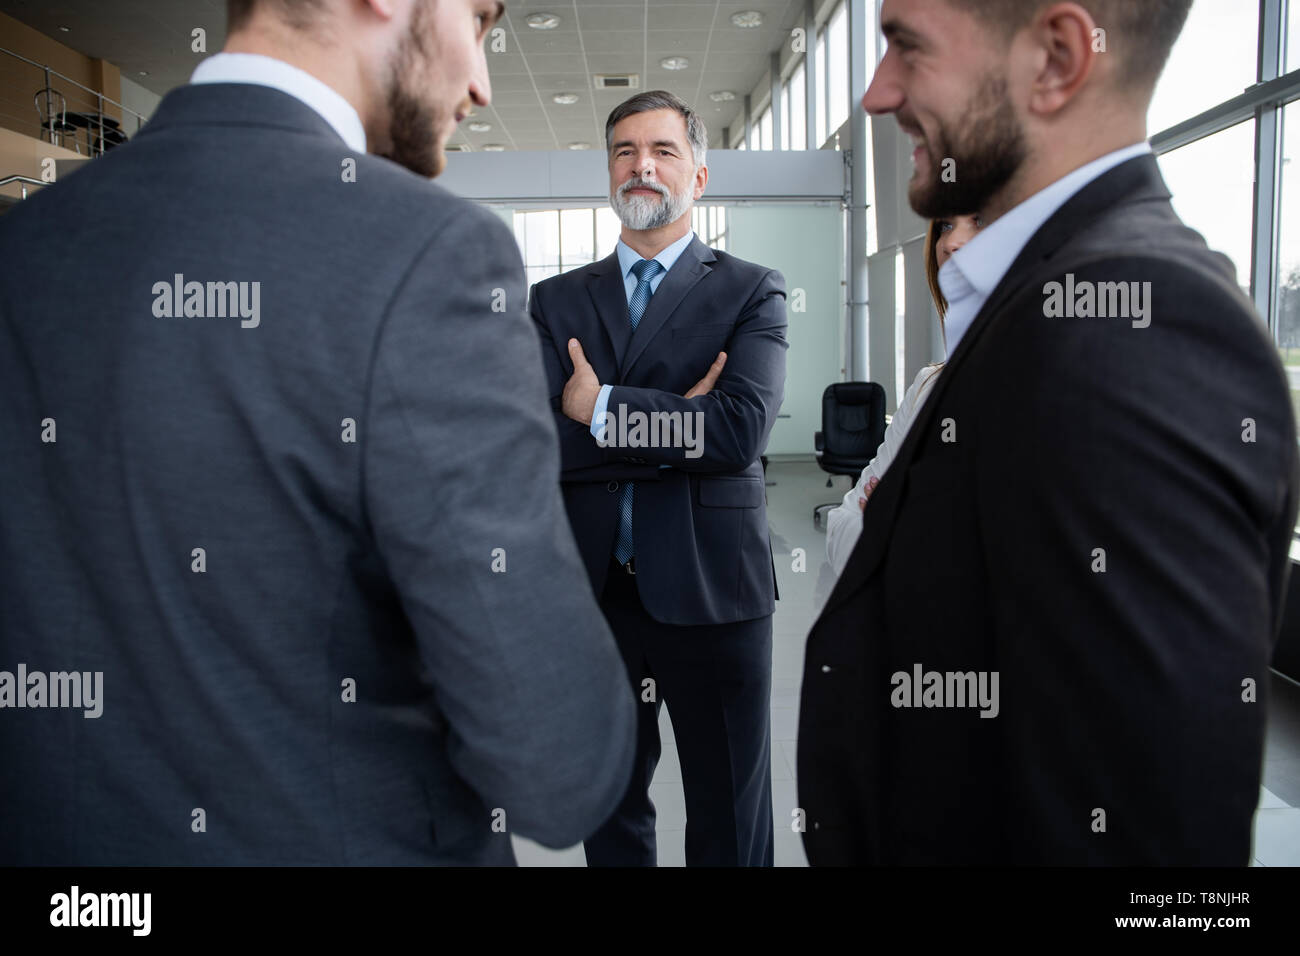 Group of Busy Business People Concept. Business team discussing work in office building hallway. Stock Photo